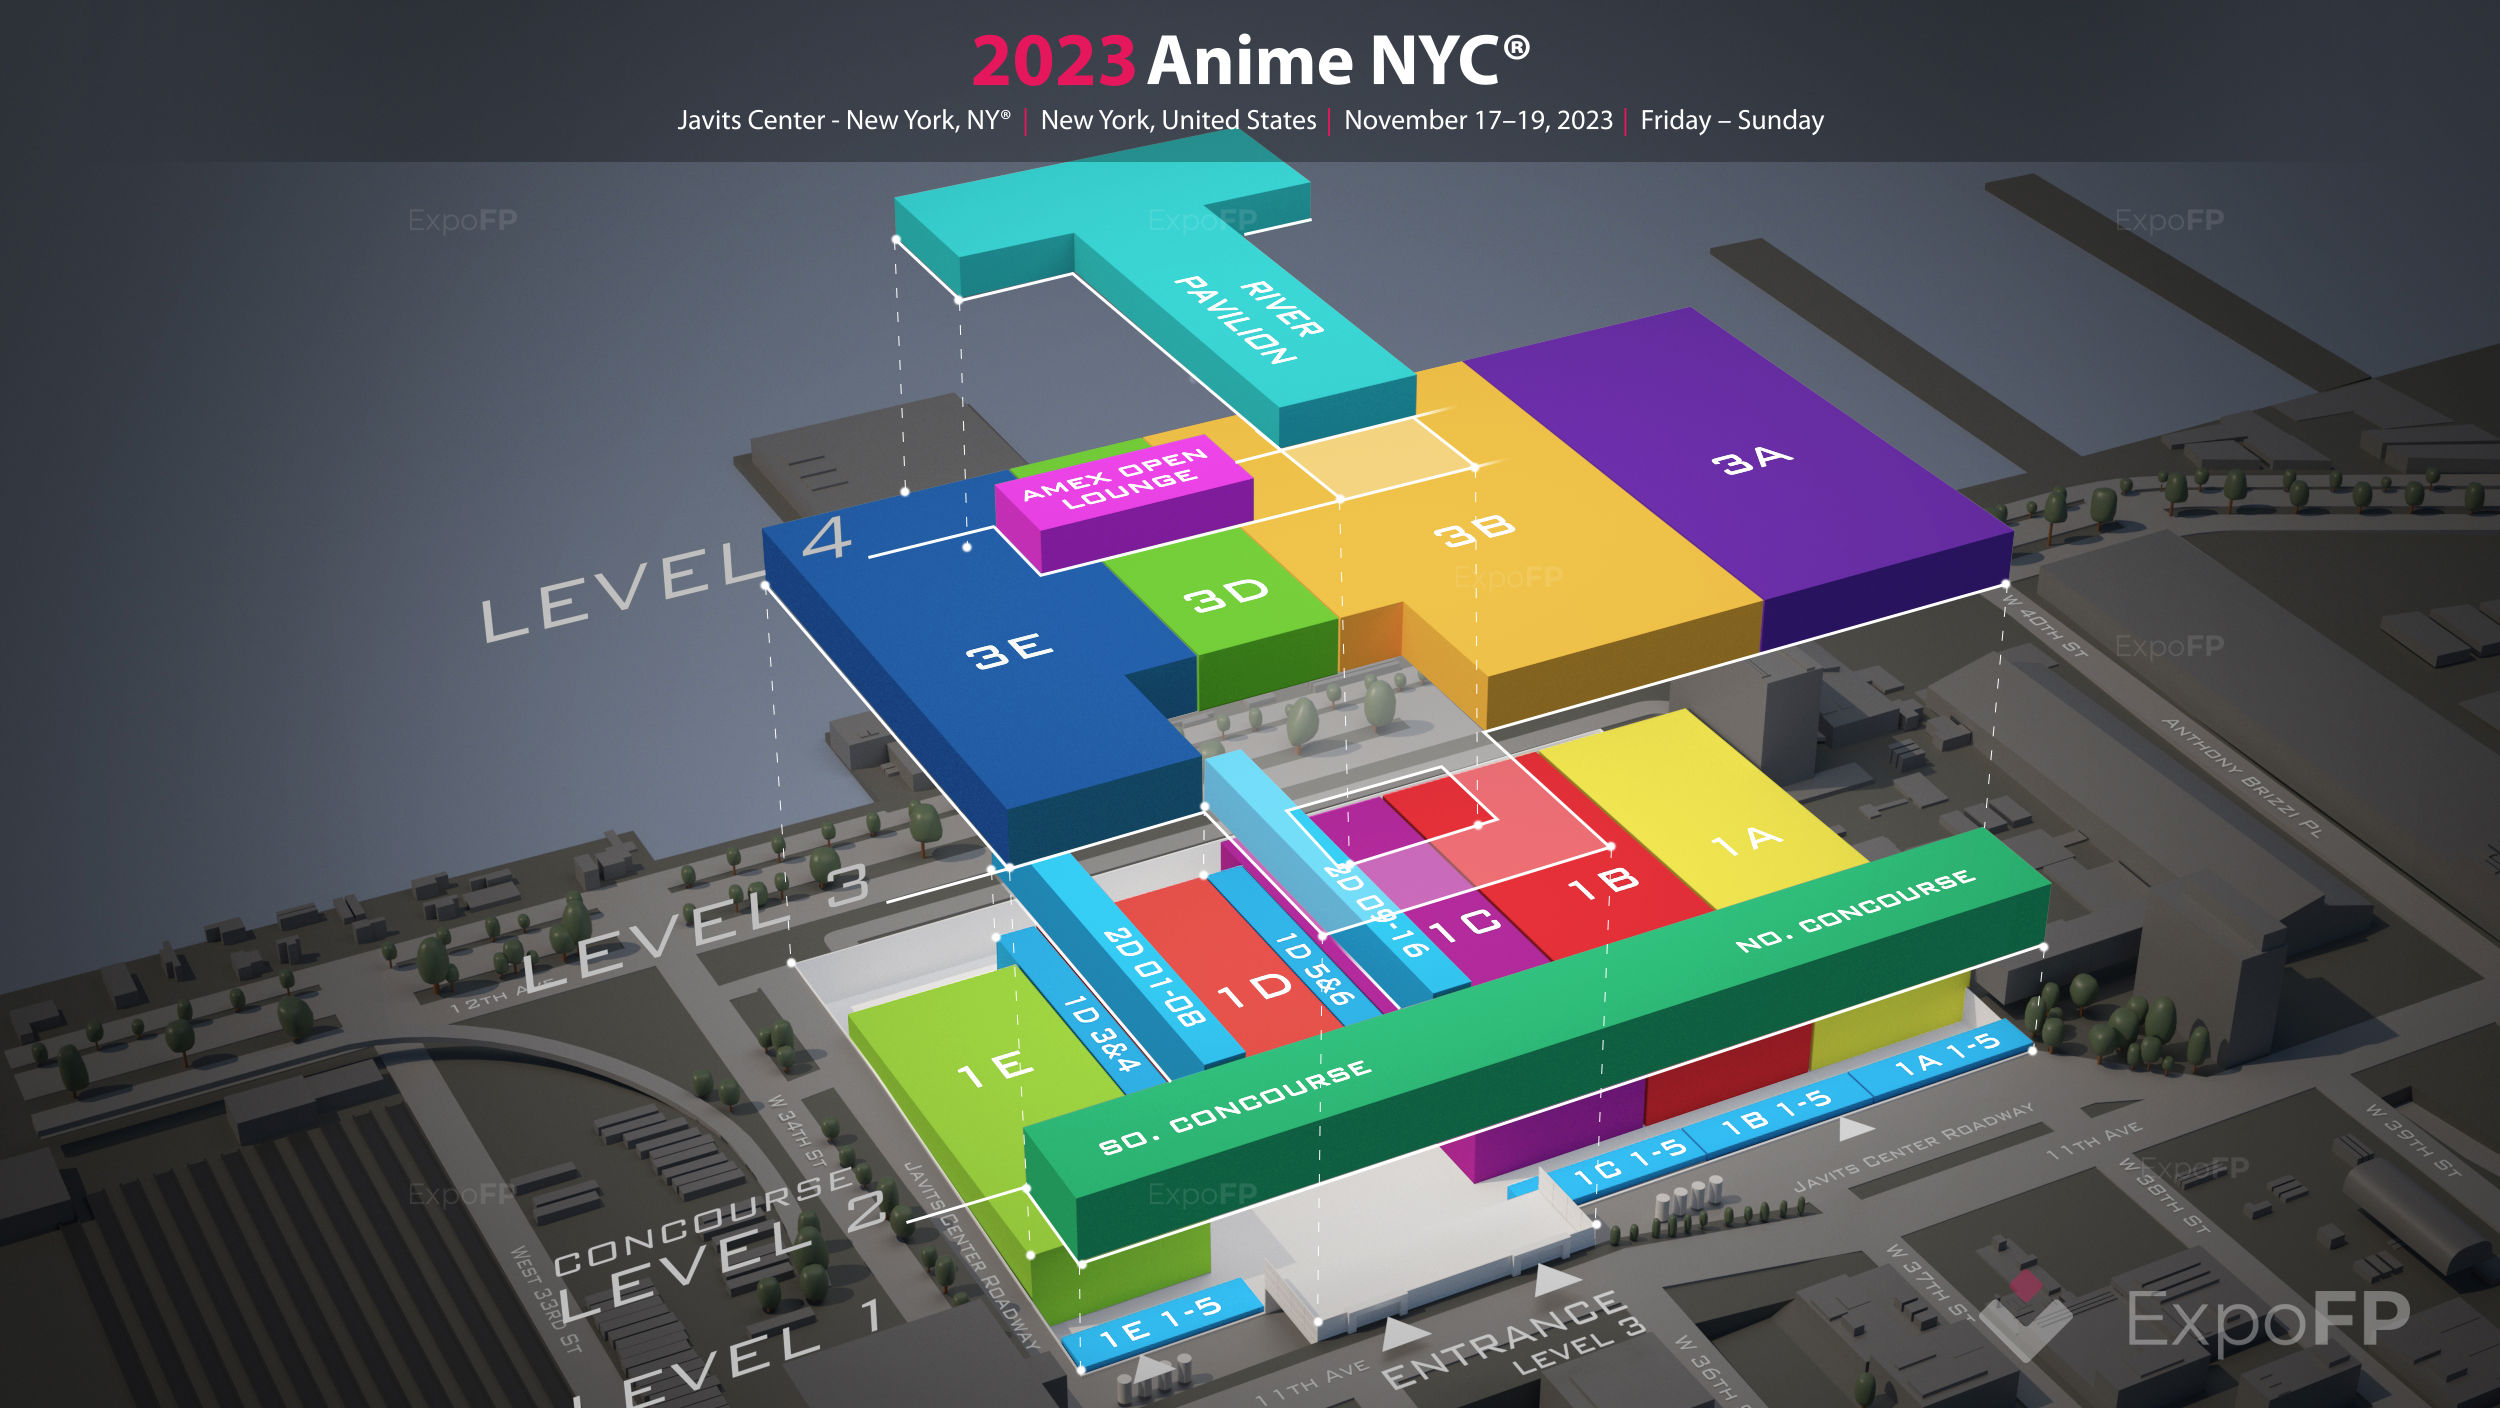 What we learned about COVID19 safety from a NYC anime convention